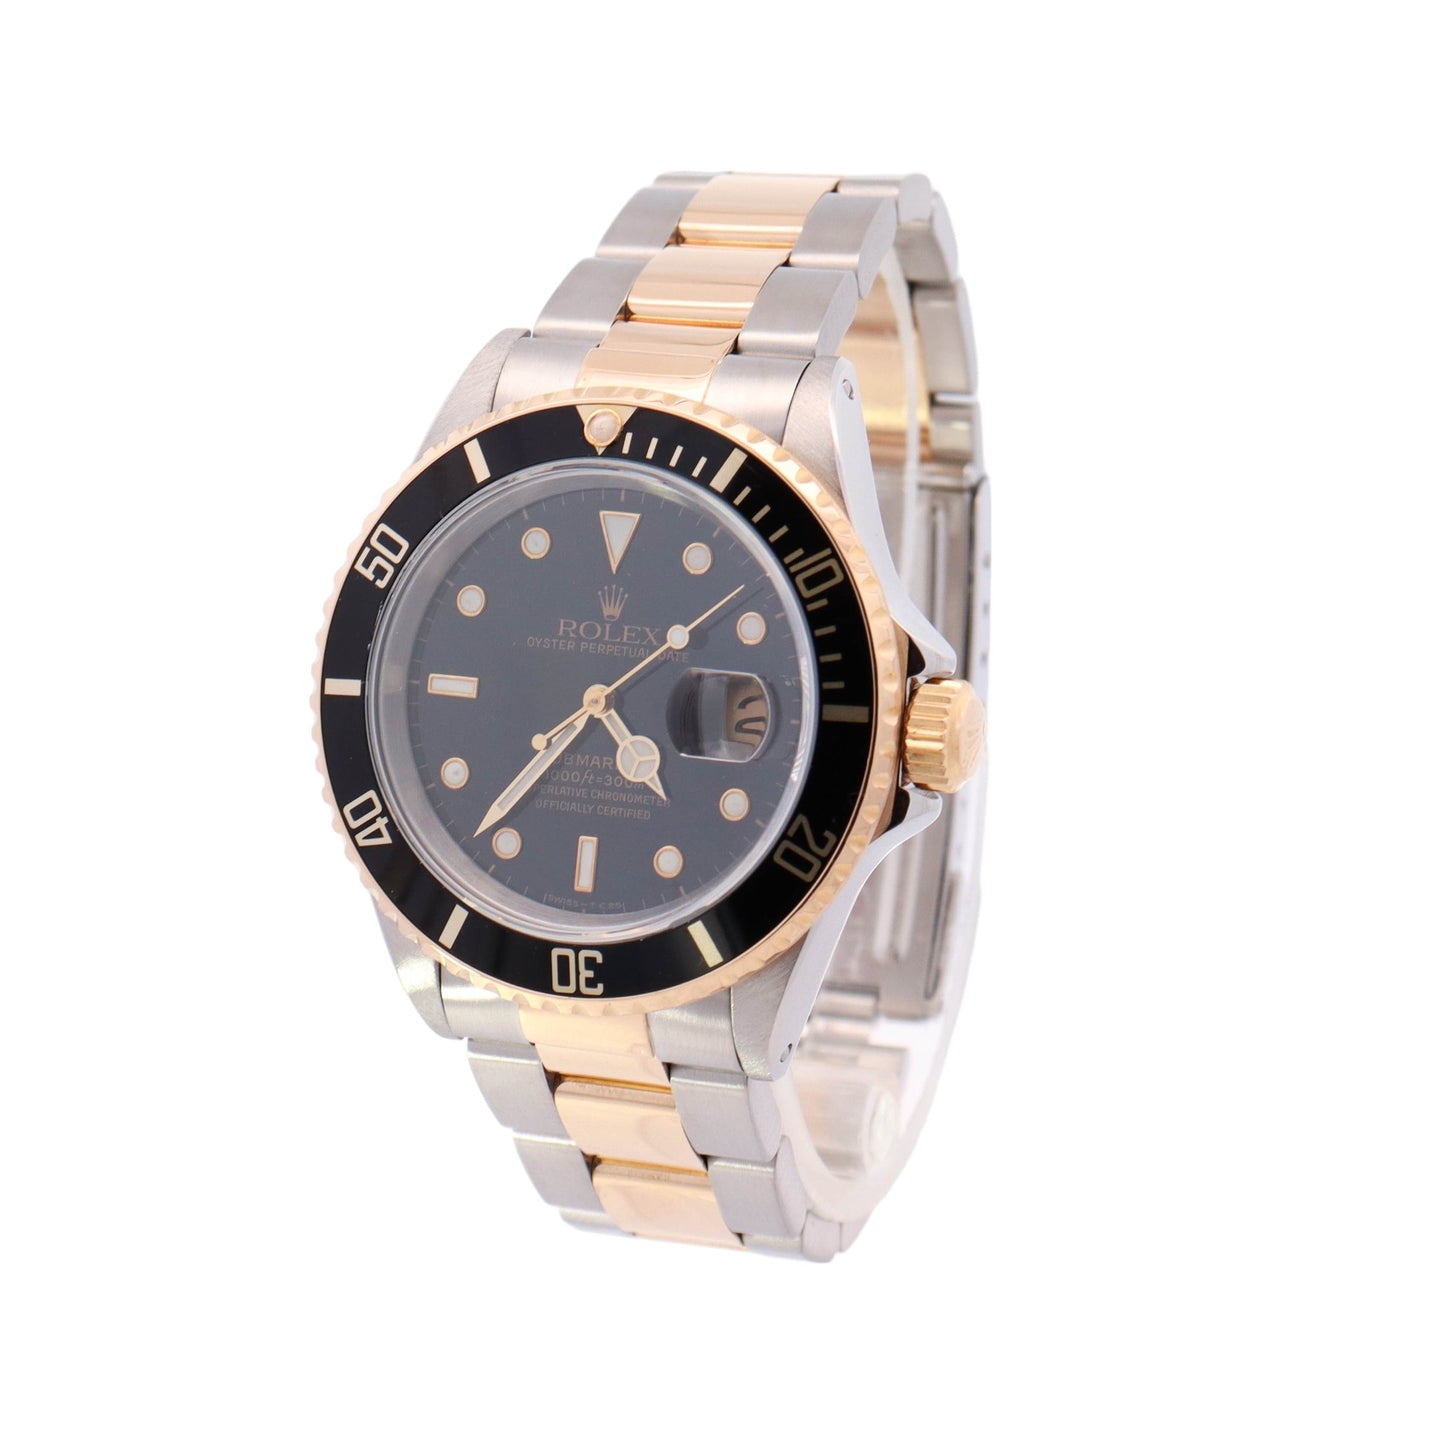 Rolex Submariner Two Tone Yellow Gold & Steel 36mm Black Dot Dial Watch Reference #: 16613LN